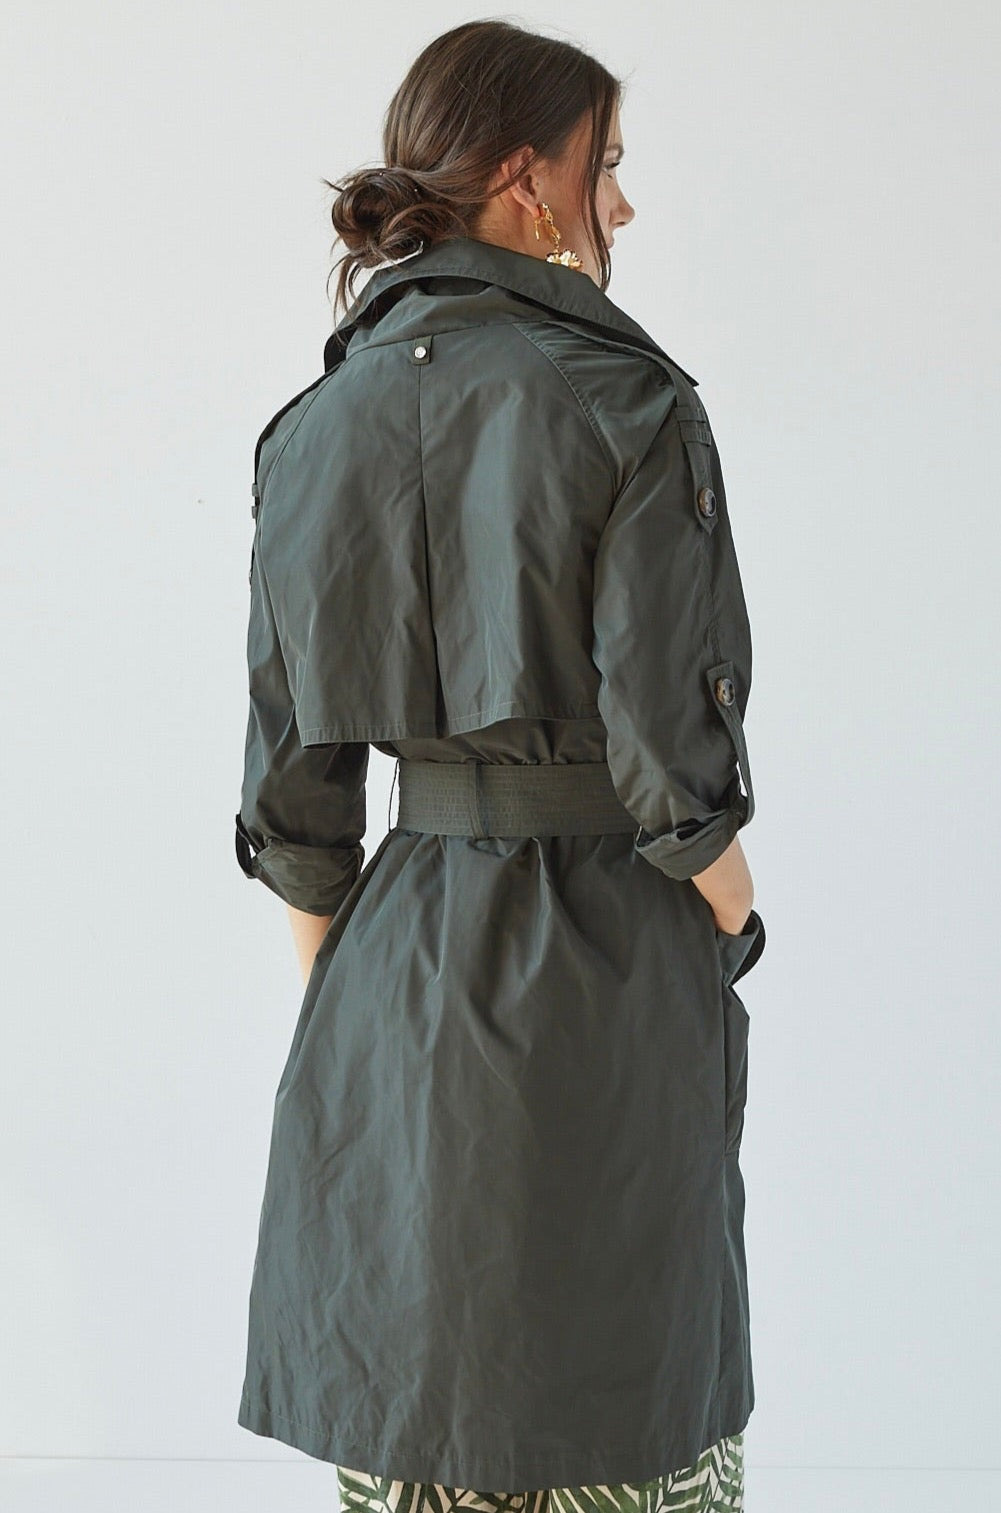 Raphael trench coat w/ rolled-up sleeve detail, patch pocket w/ cuff & sash